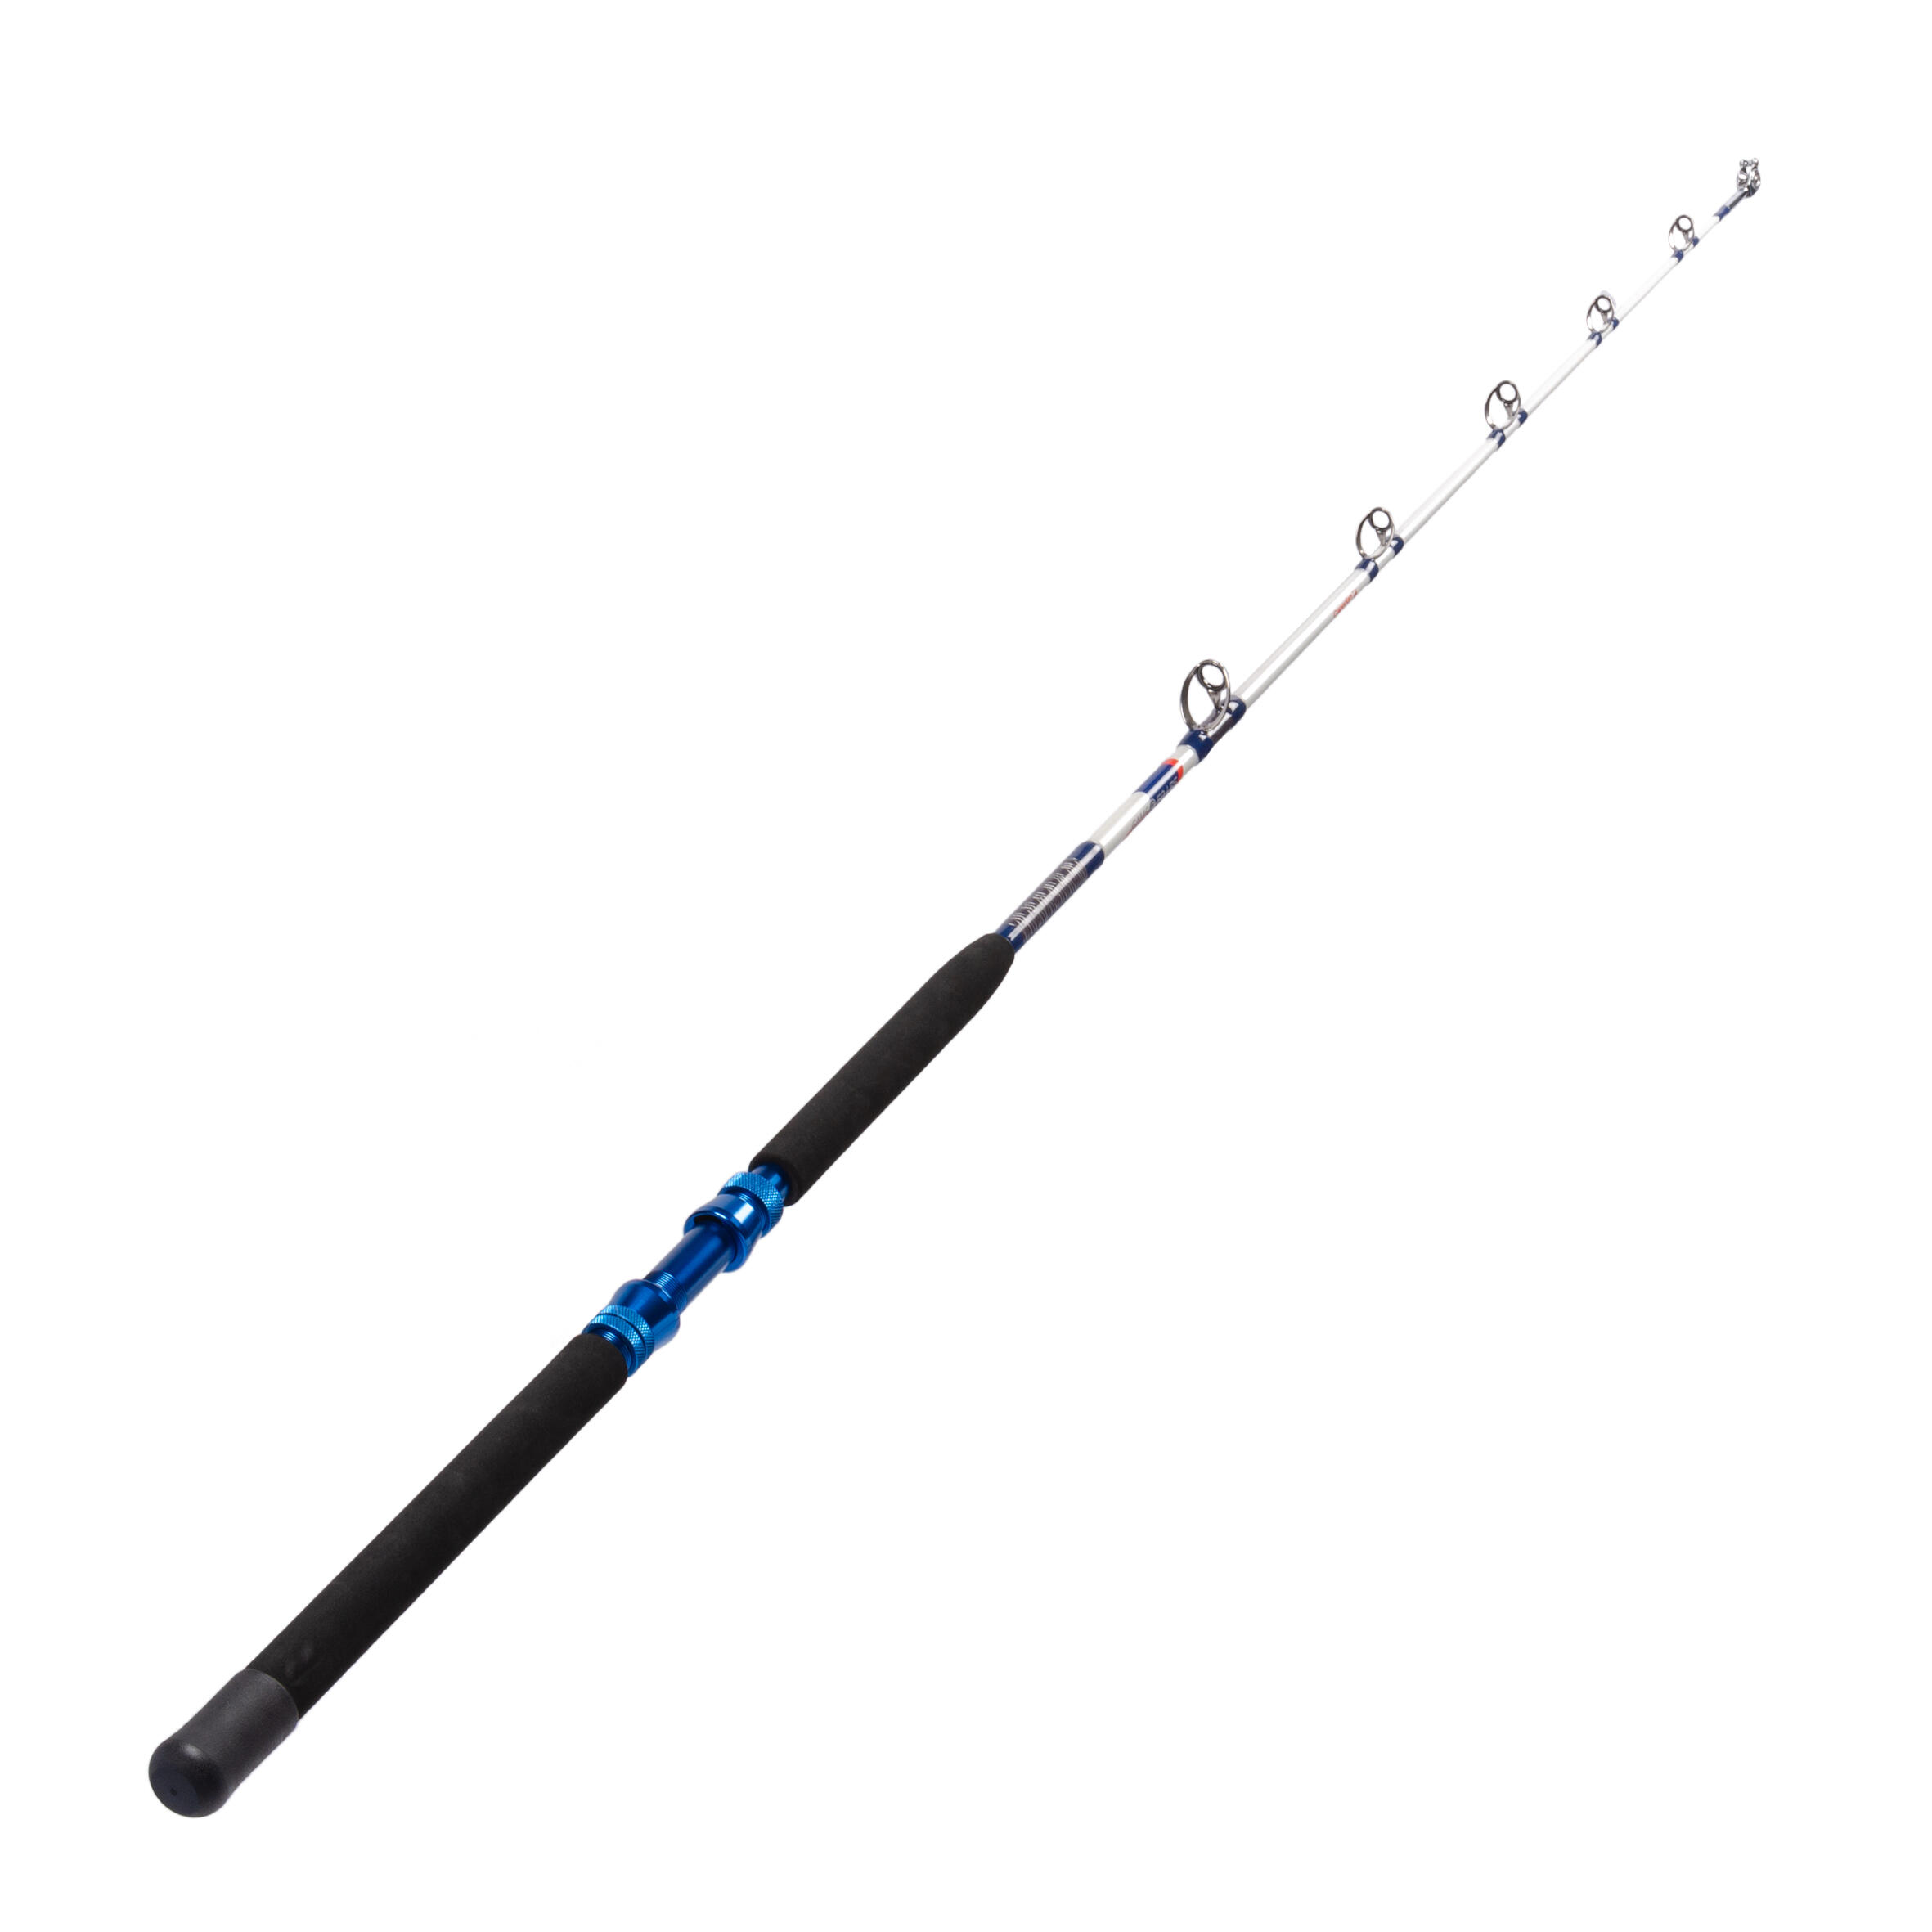 Boat lure fishing rods